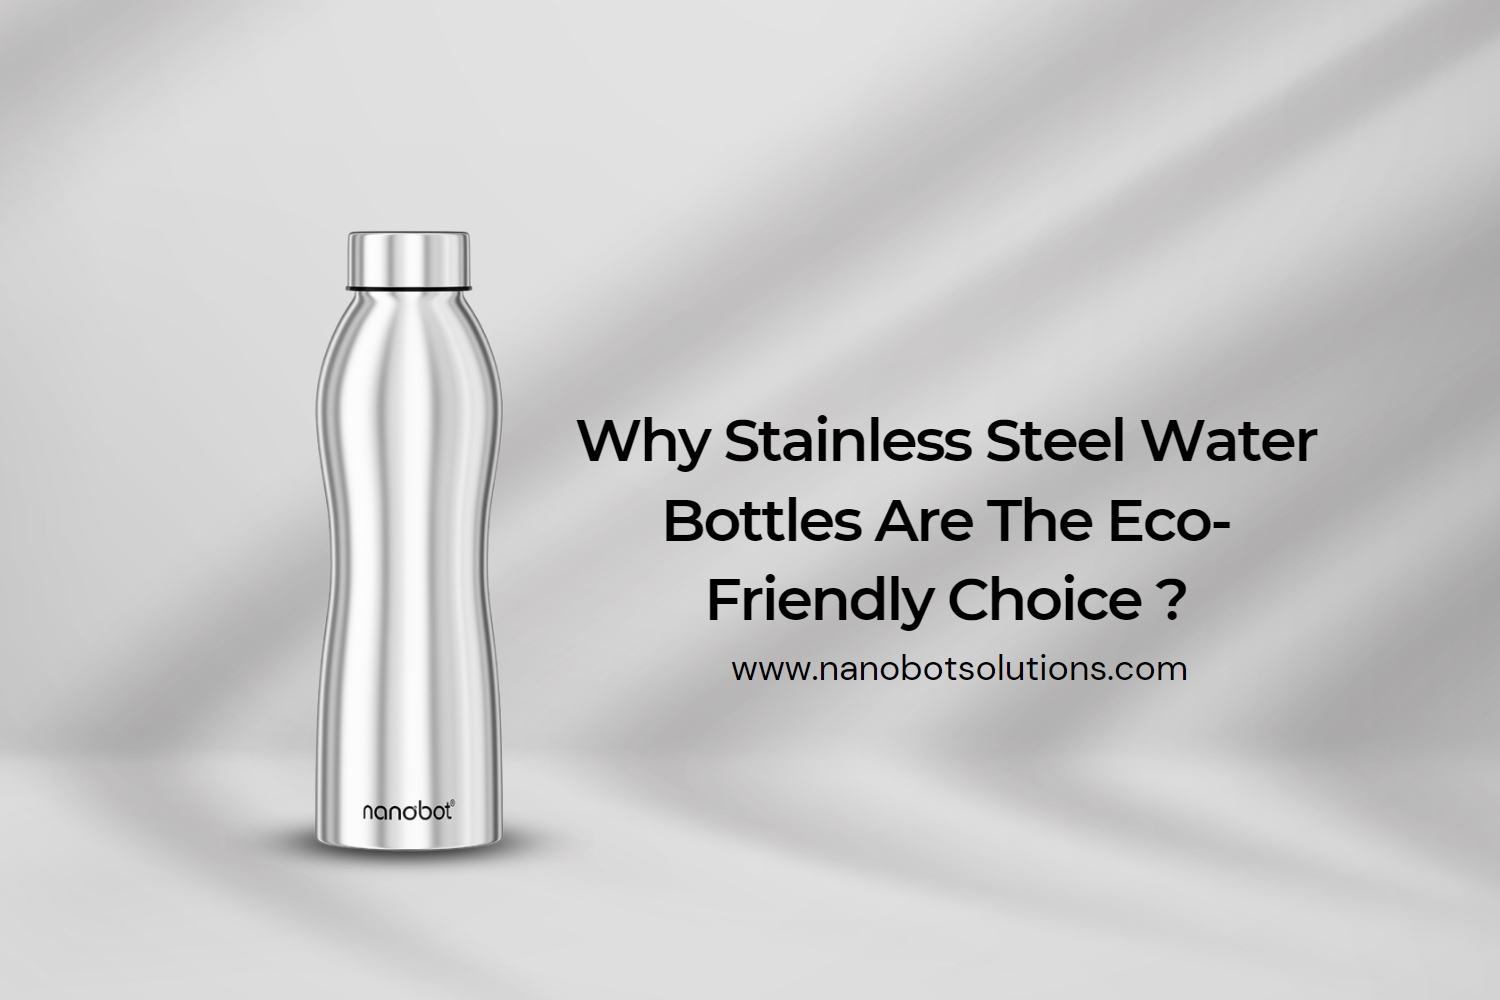 Why Stainless Steel Water Bottles Are The Eco Friendly Choice | Nanobot